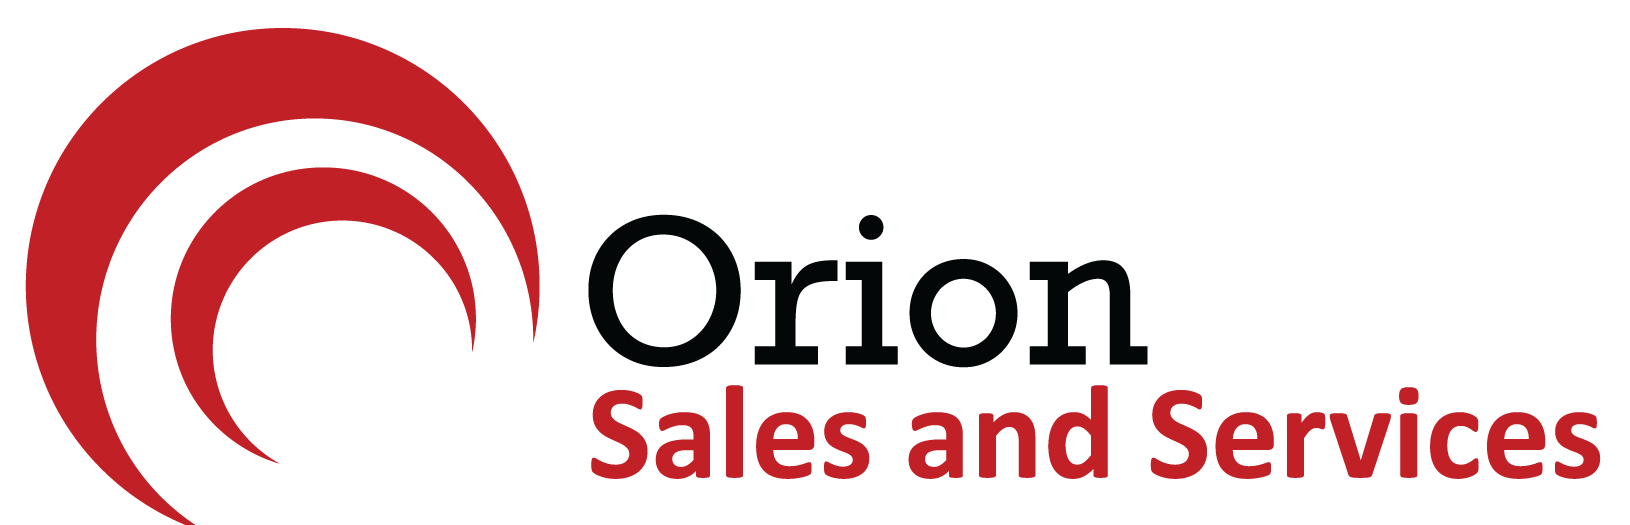 Orionsns